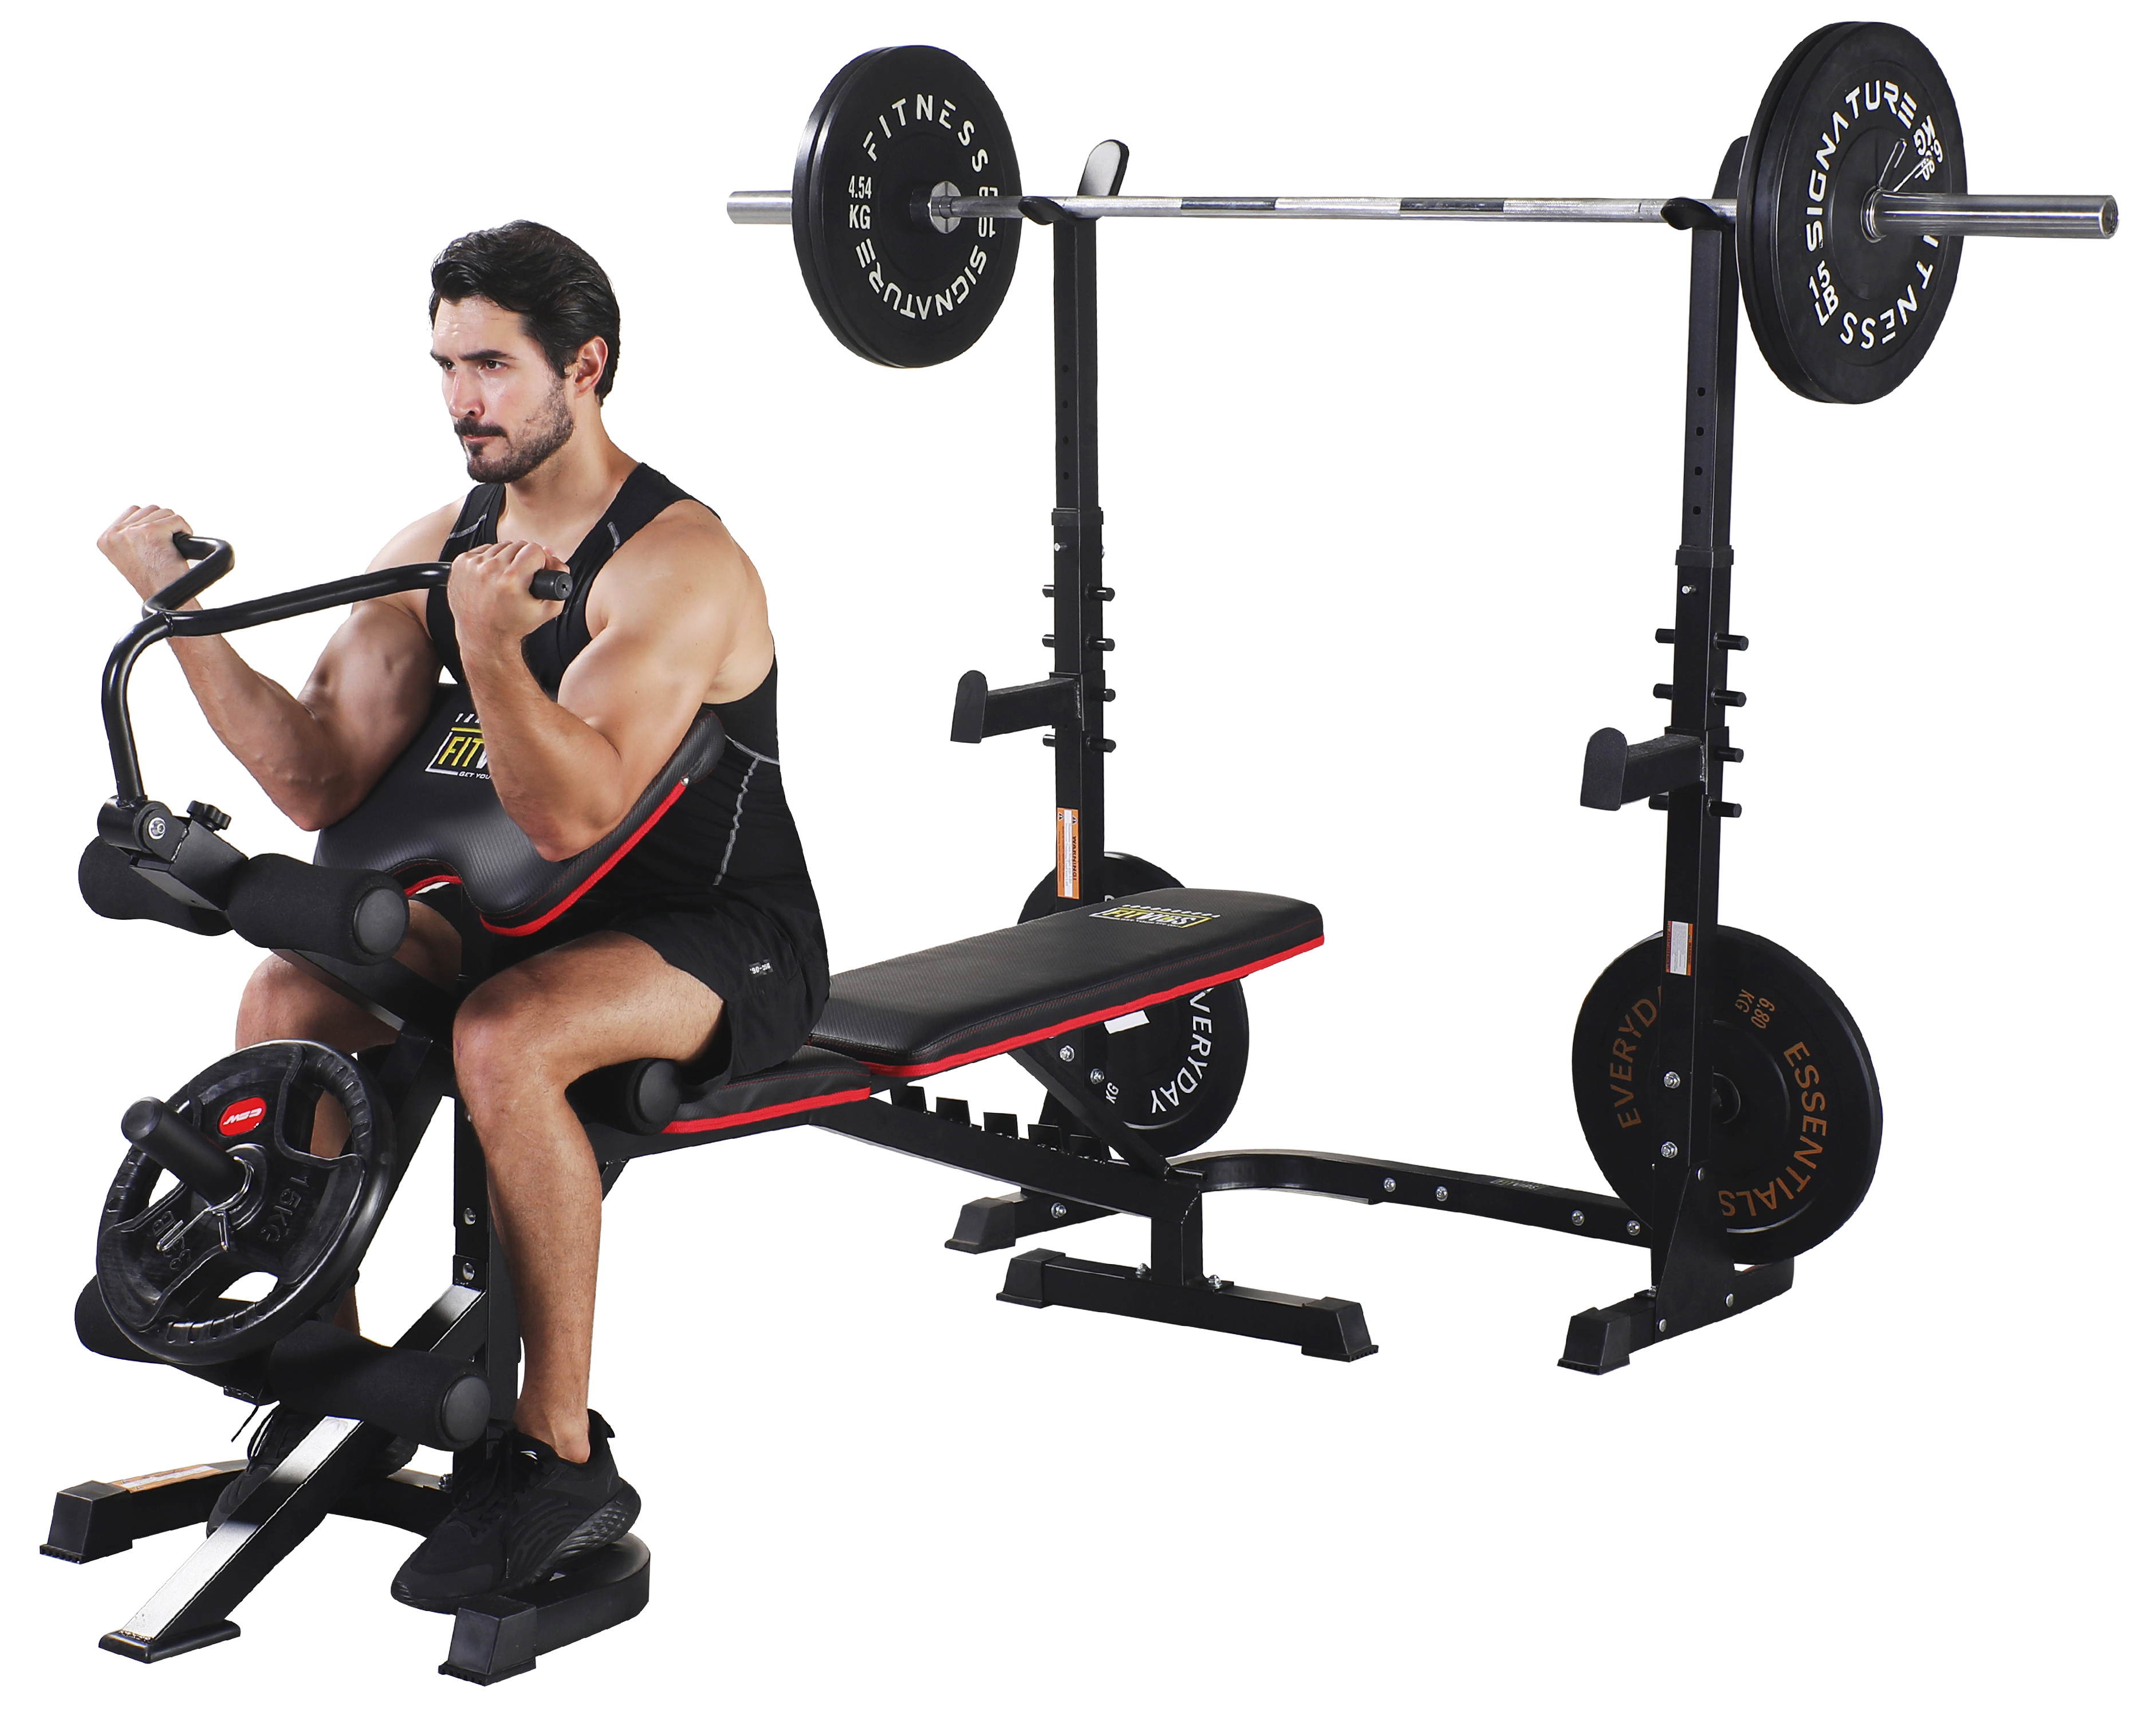 Fitvids LX600 Adjustable Olympic Workout Bench with Squat Rack, Leg Extension, Preacher Curl, and Weight Storage, 800-Pound Capacity (Barbell and weights not included) - image 3 of 10